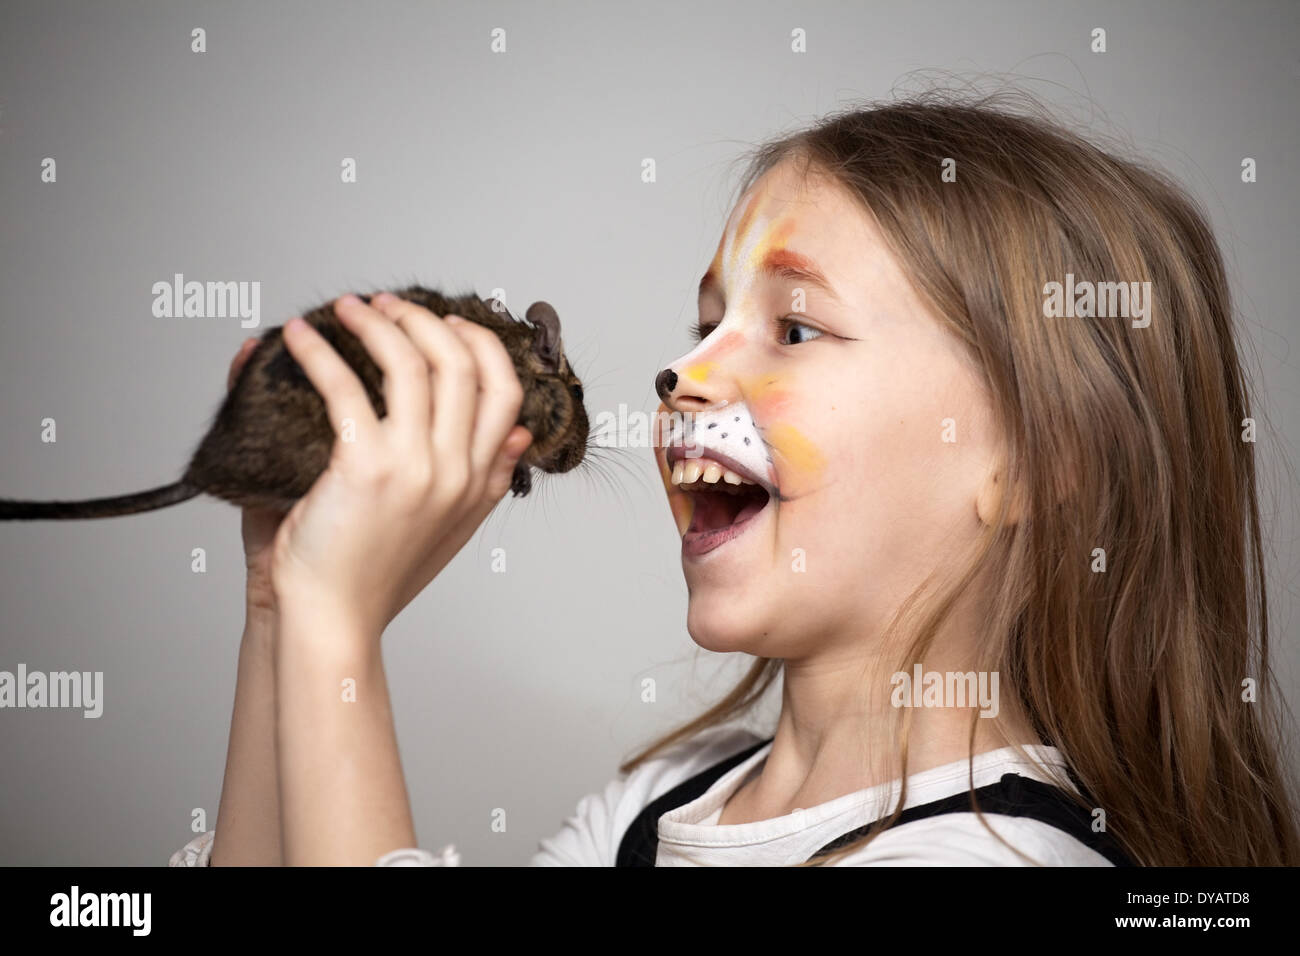 little girl with cat painting makeup on the face catching the mouse Stock Photo